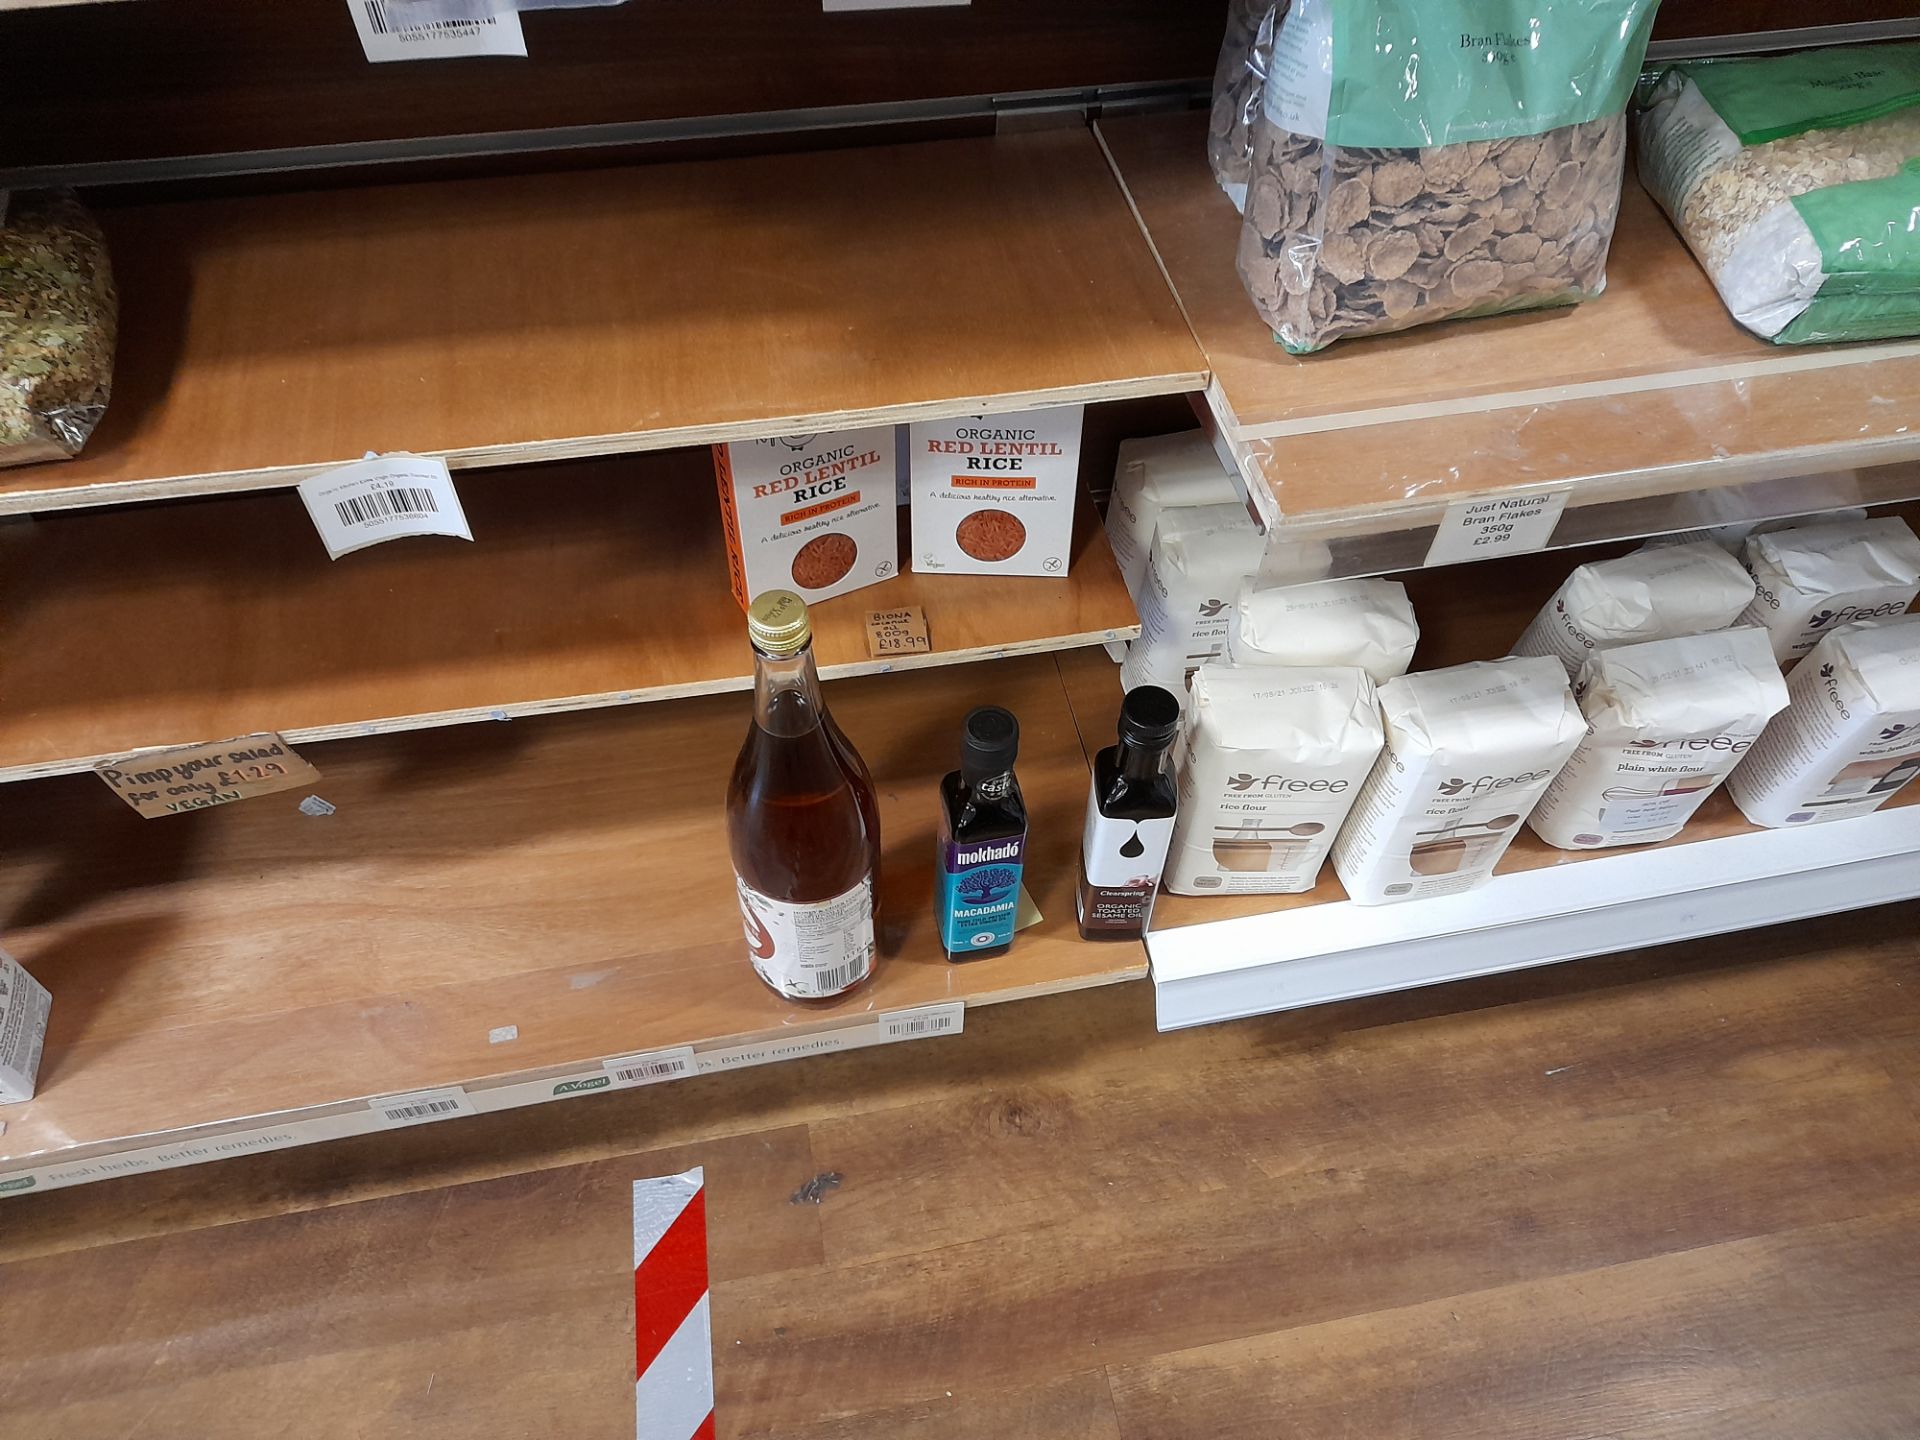 Assortment of Food Stock/Ingredients to 8x bays of shelving, cupboard to include various flours, - Image 11 of 17